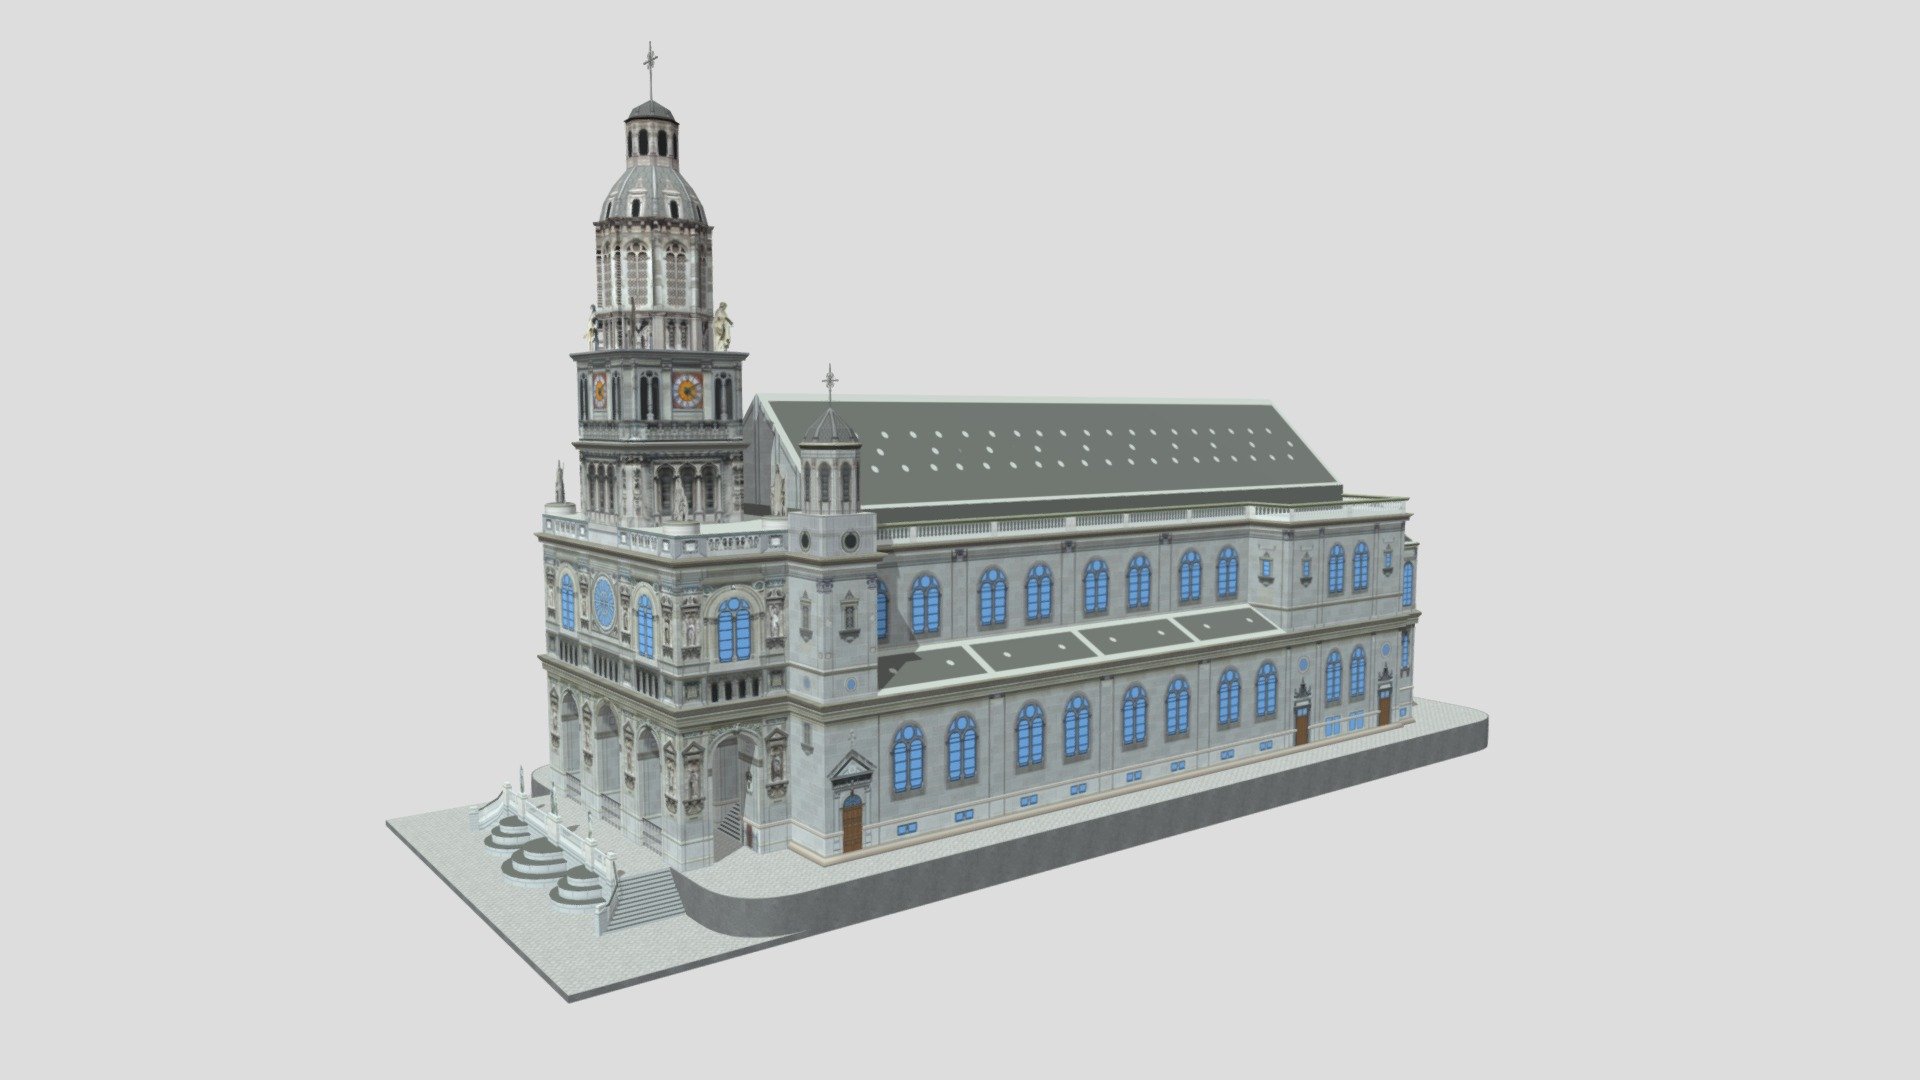 Eglise Sainte Trinite Roman Catholic Church Paris Low Poly
Originally created with 3ds Max 2015 and rendered in V-Ray 3.0. 

Total Poly Counts:
Poly Count = 5389
Vertex Count = 7132

Please Visit
https://nuralam3d.blogspot.com/2021/11/eglise-sainte-trinite-roman-catholic.html - Eglise Sainte Trinite Catholic Church Paris - 3D model by nuralam018 3d model